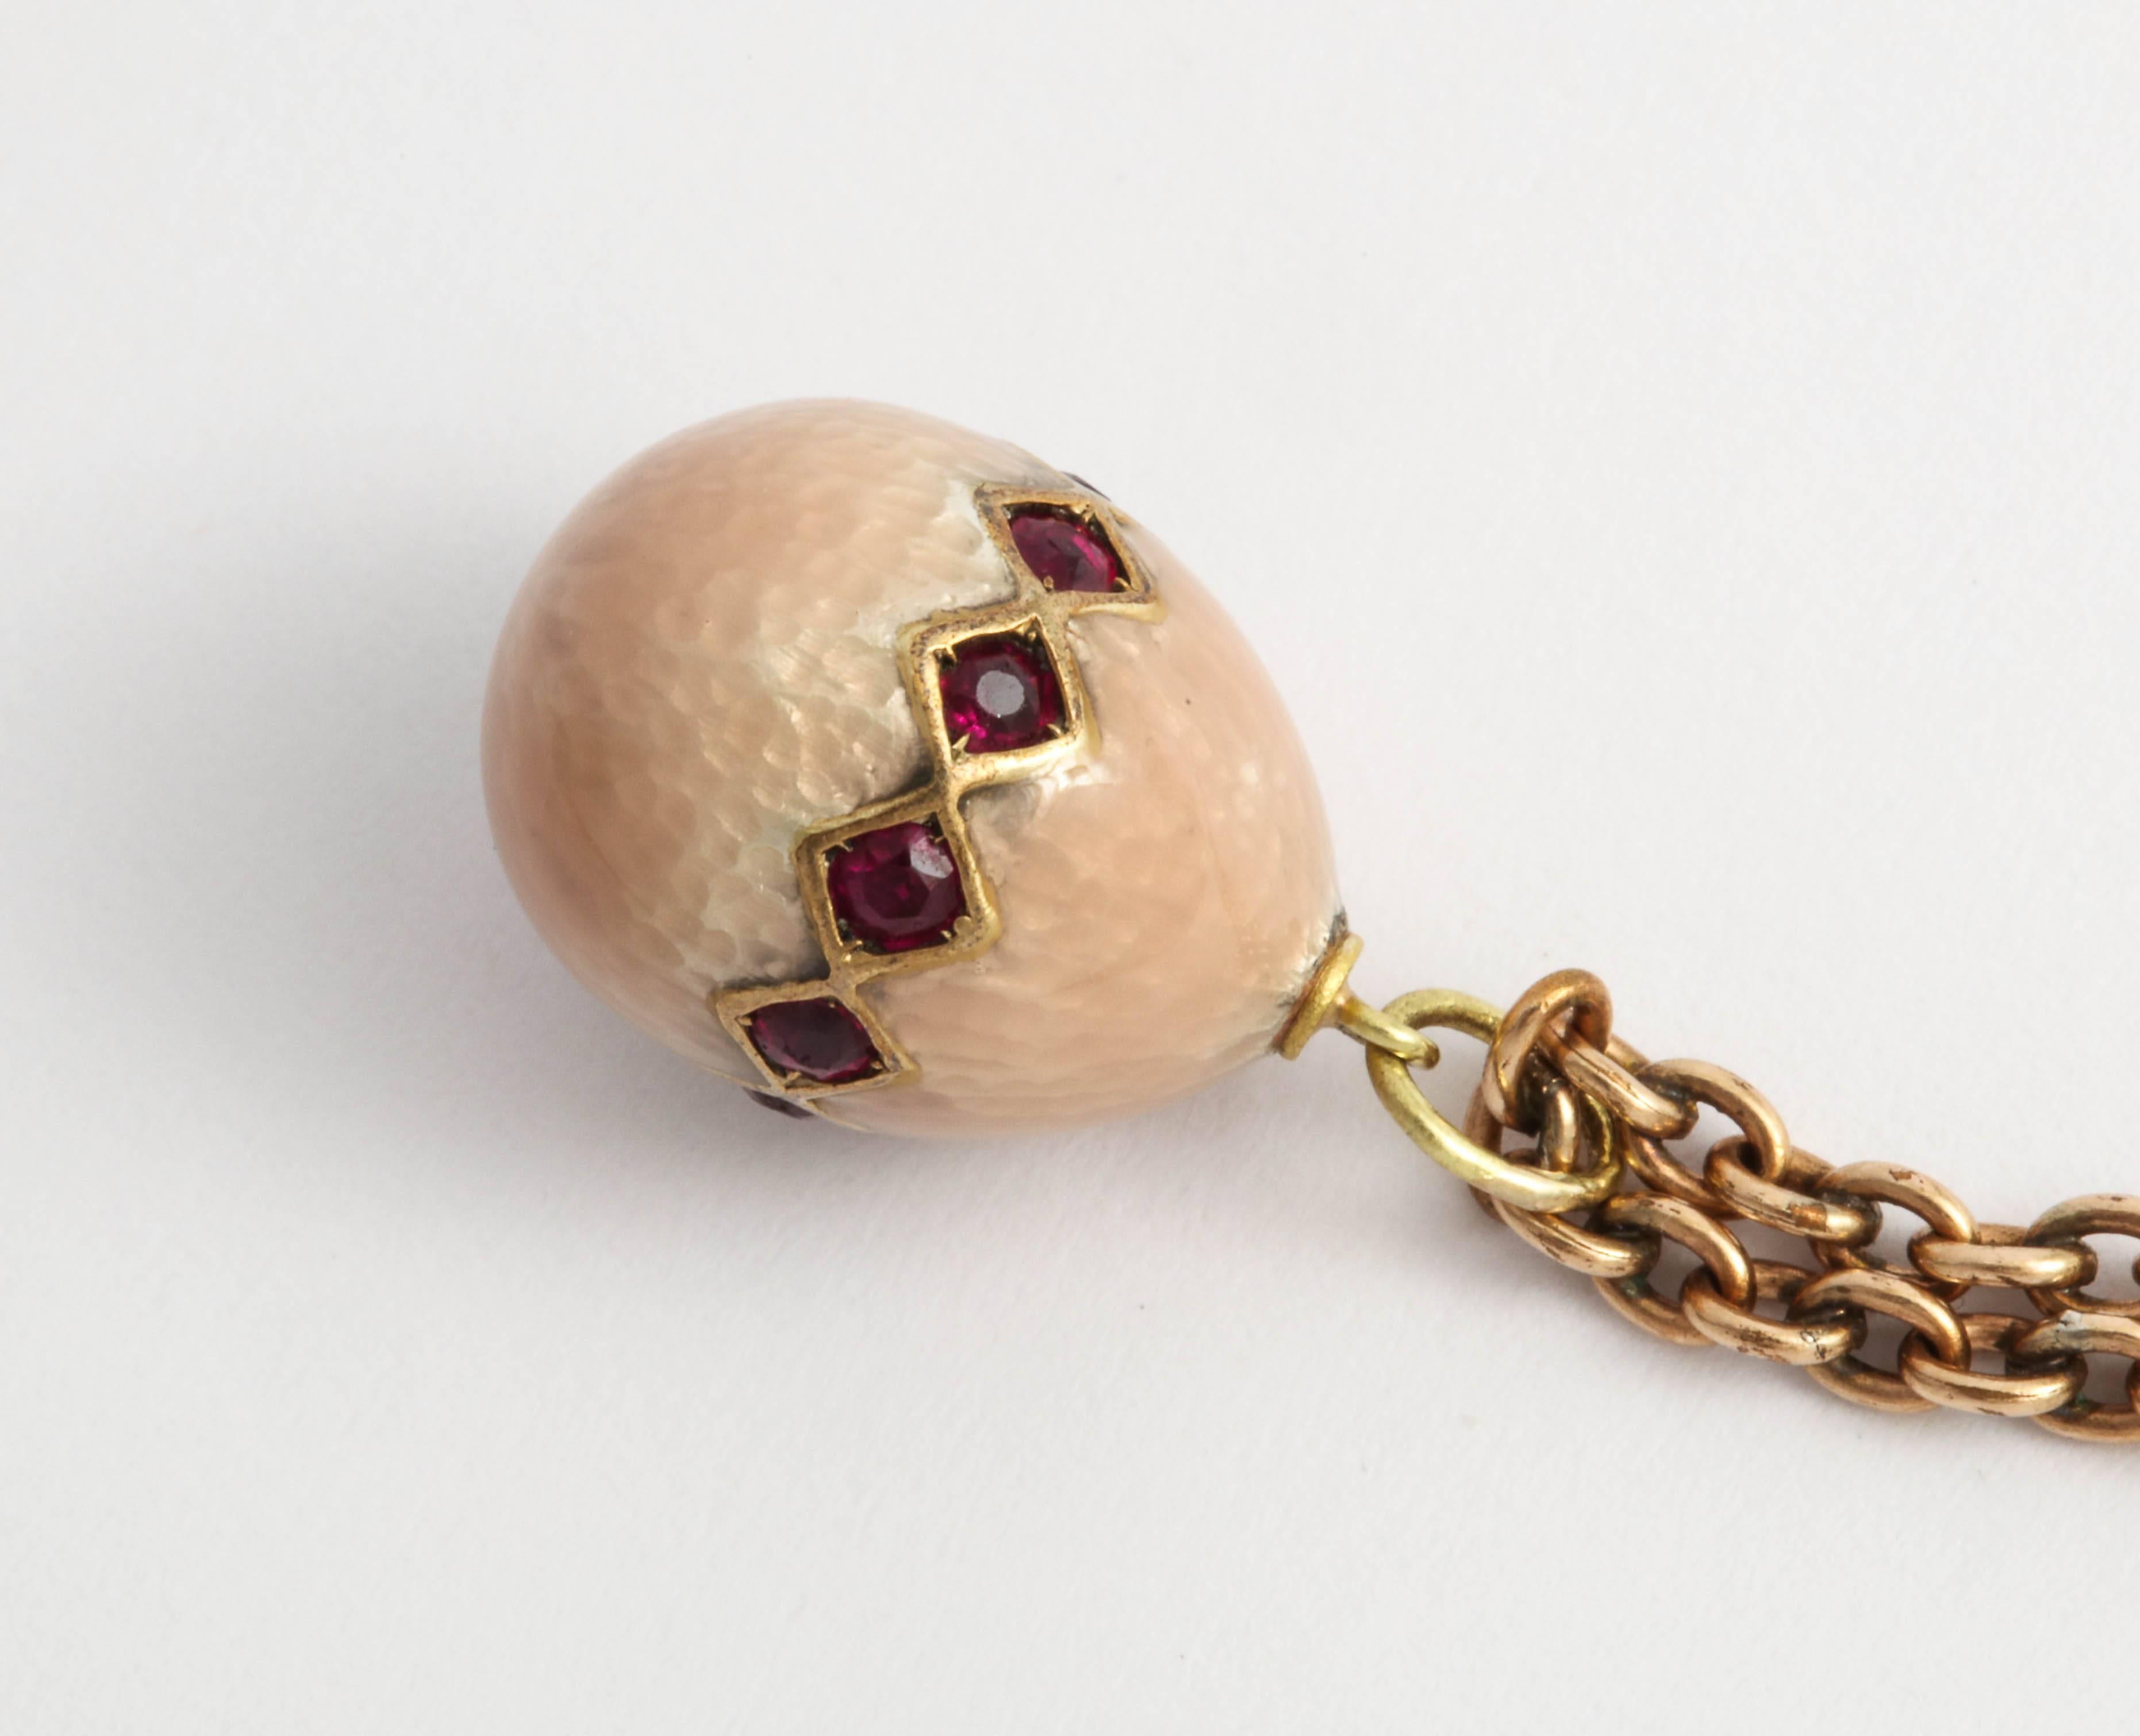 Round Cut Russian Imperial-era Enameled and Ruby Egg Pendant, circa 1900